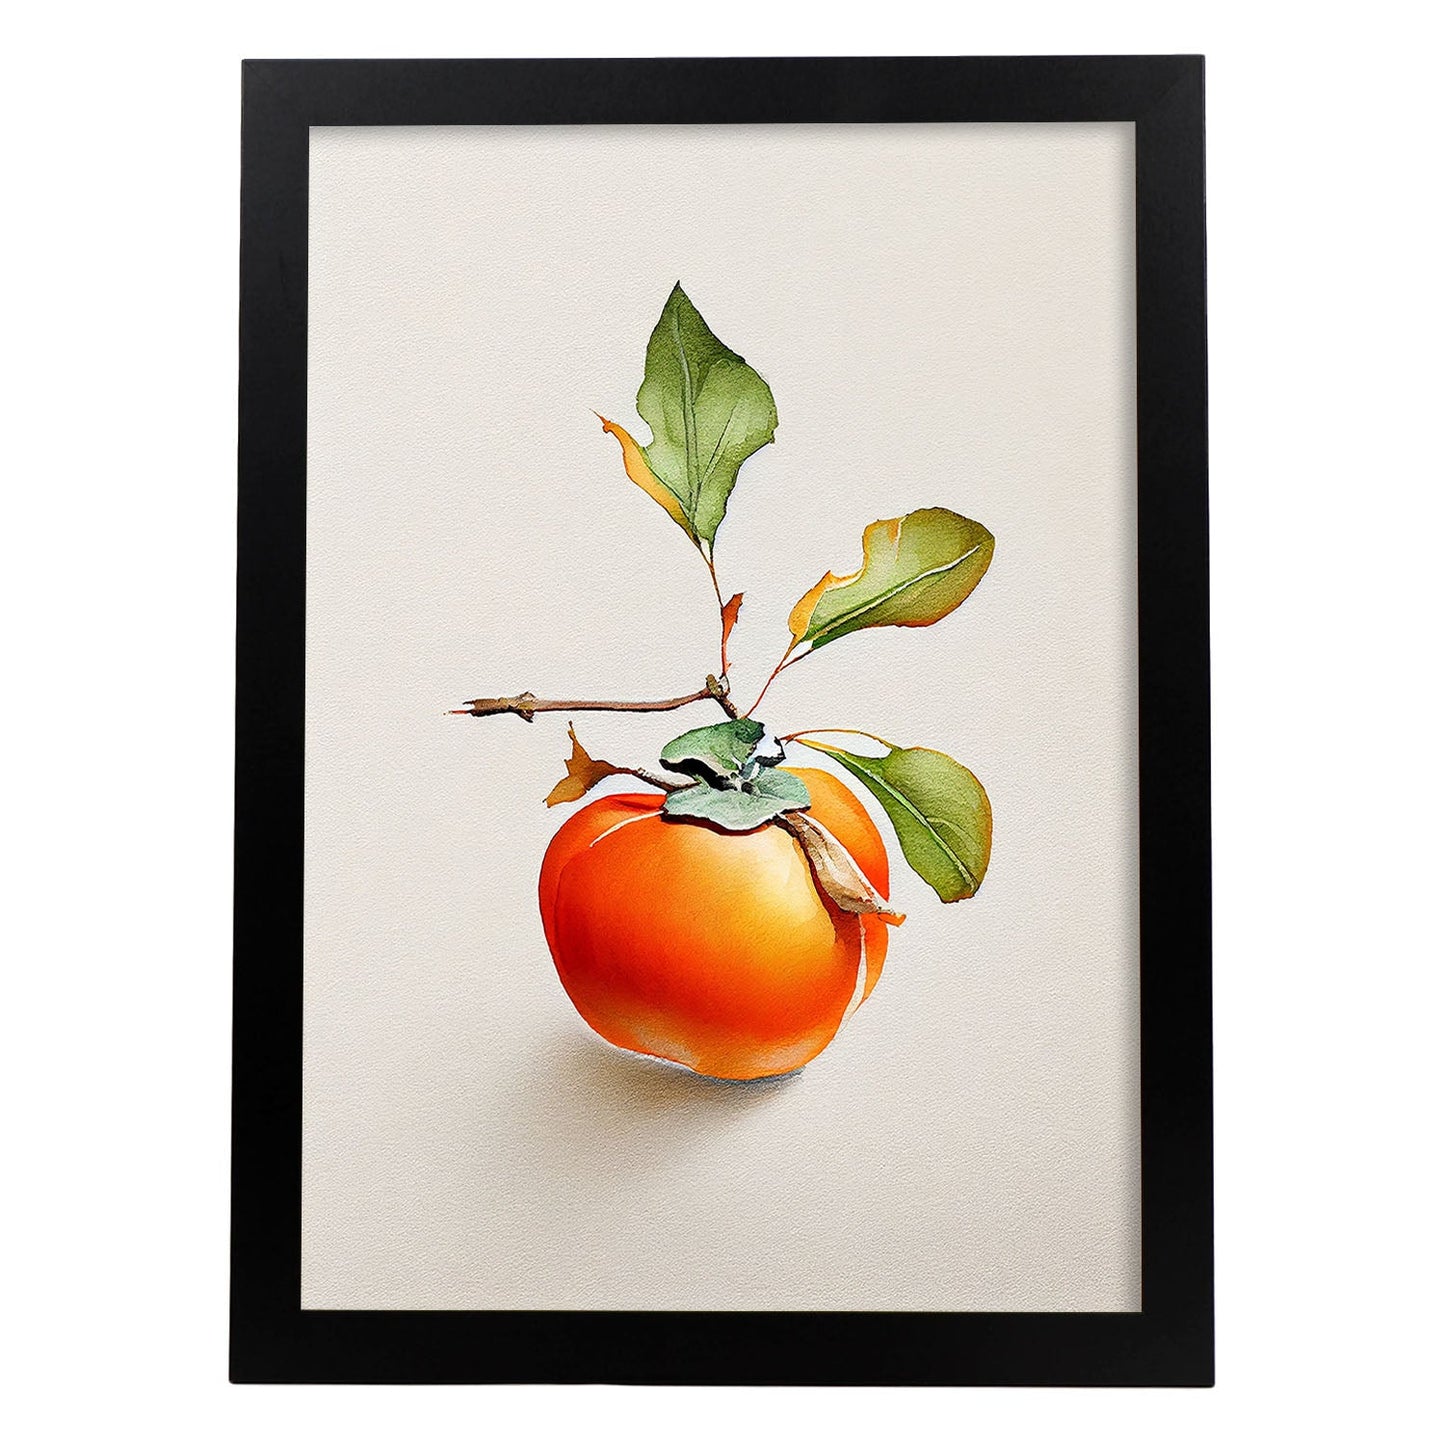 Nacnic minimalist Persimmon. Aesthetic Wall Art Prints for Bedroom or Living Room Design.